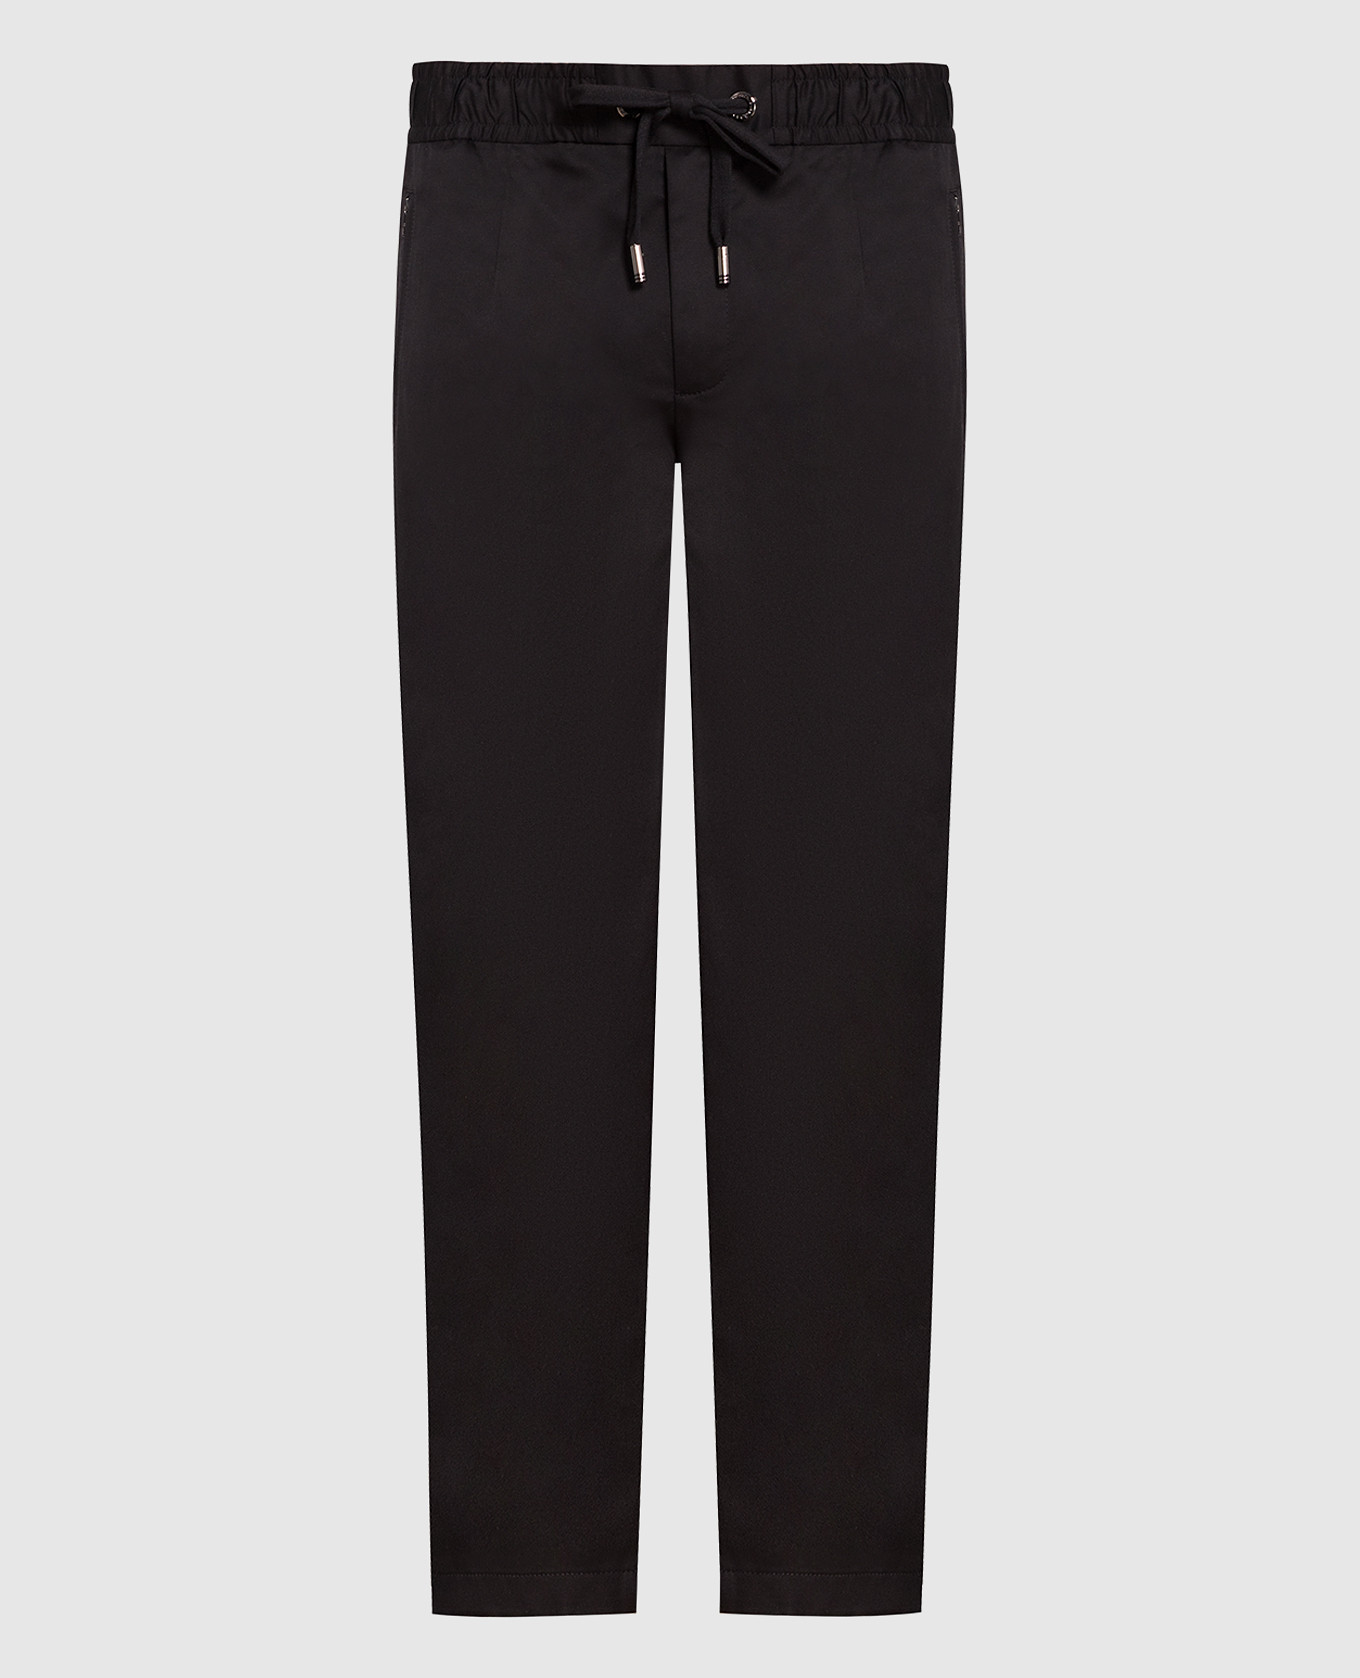 Black pants with logo patch